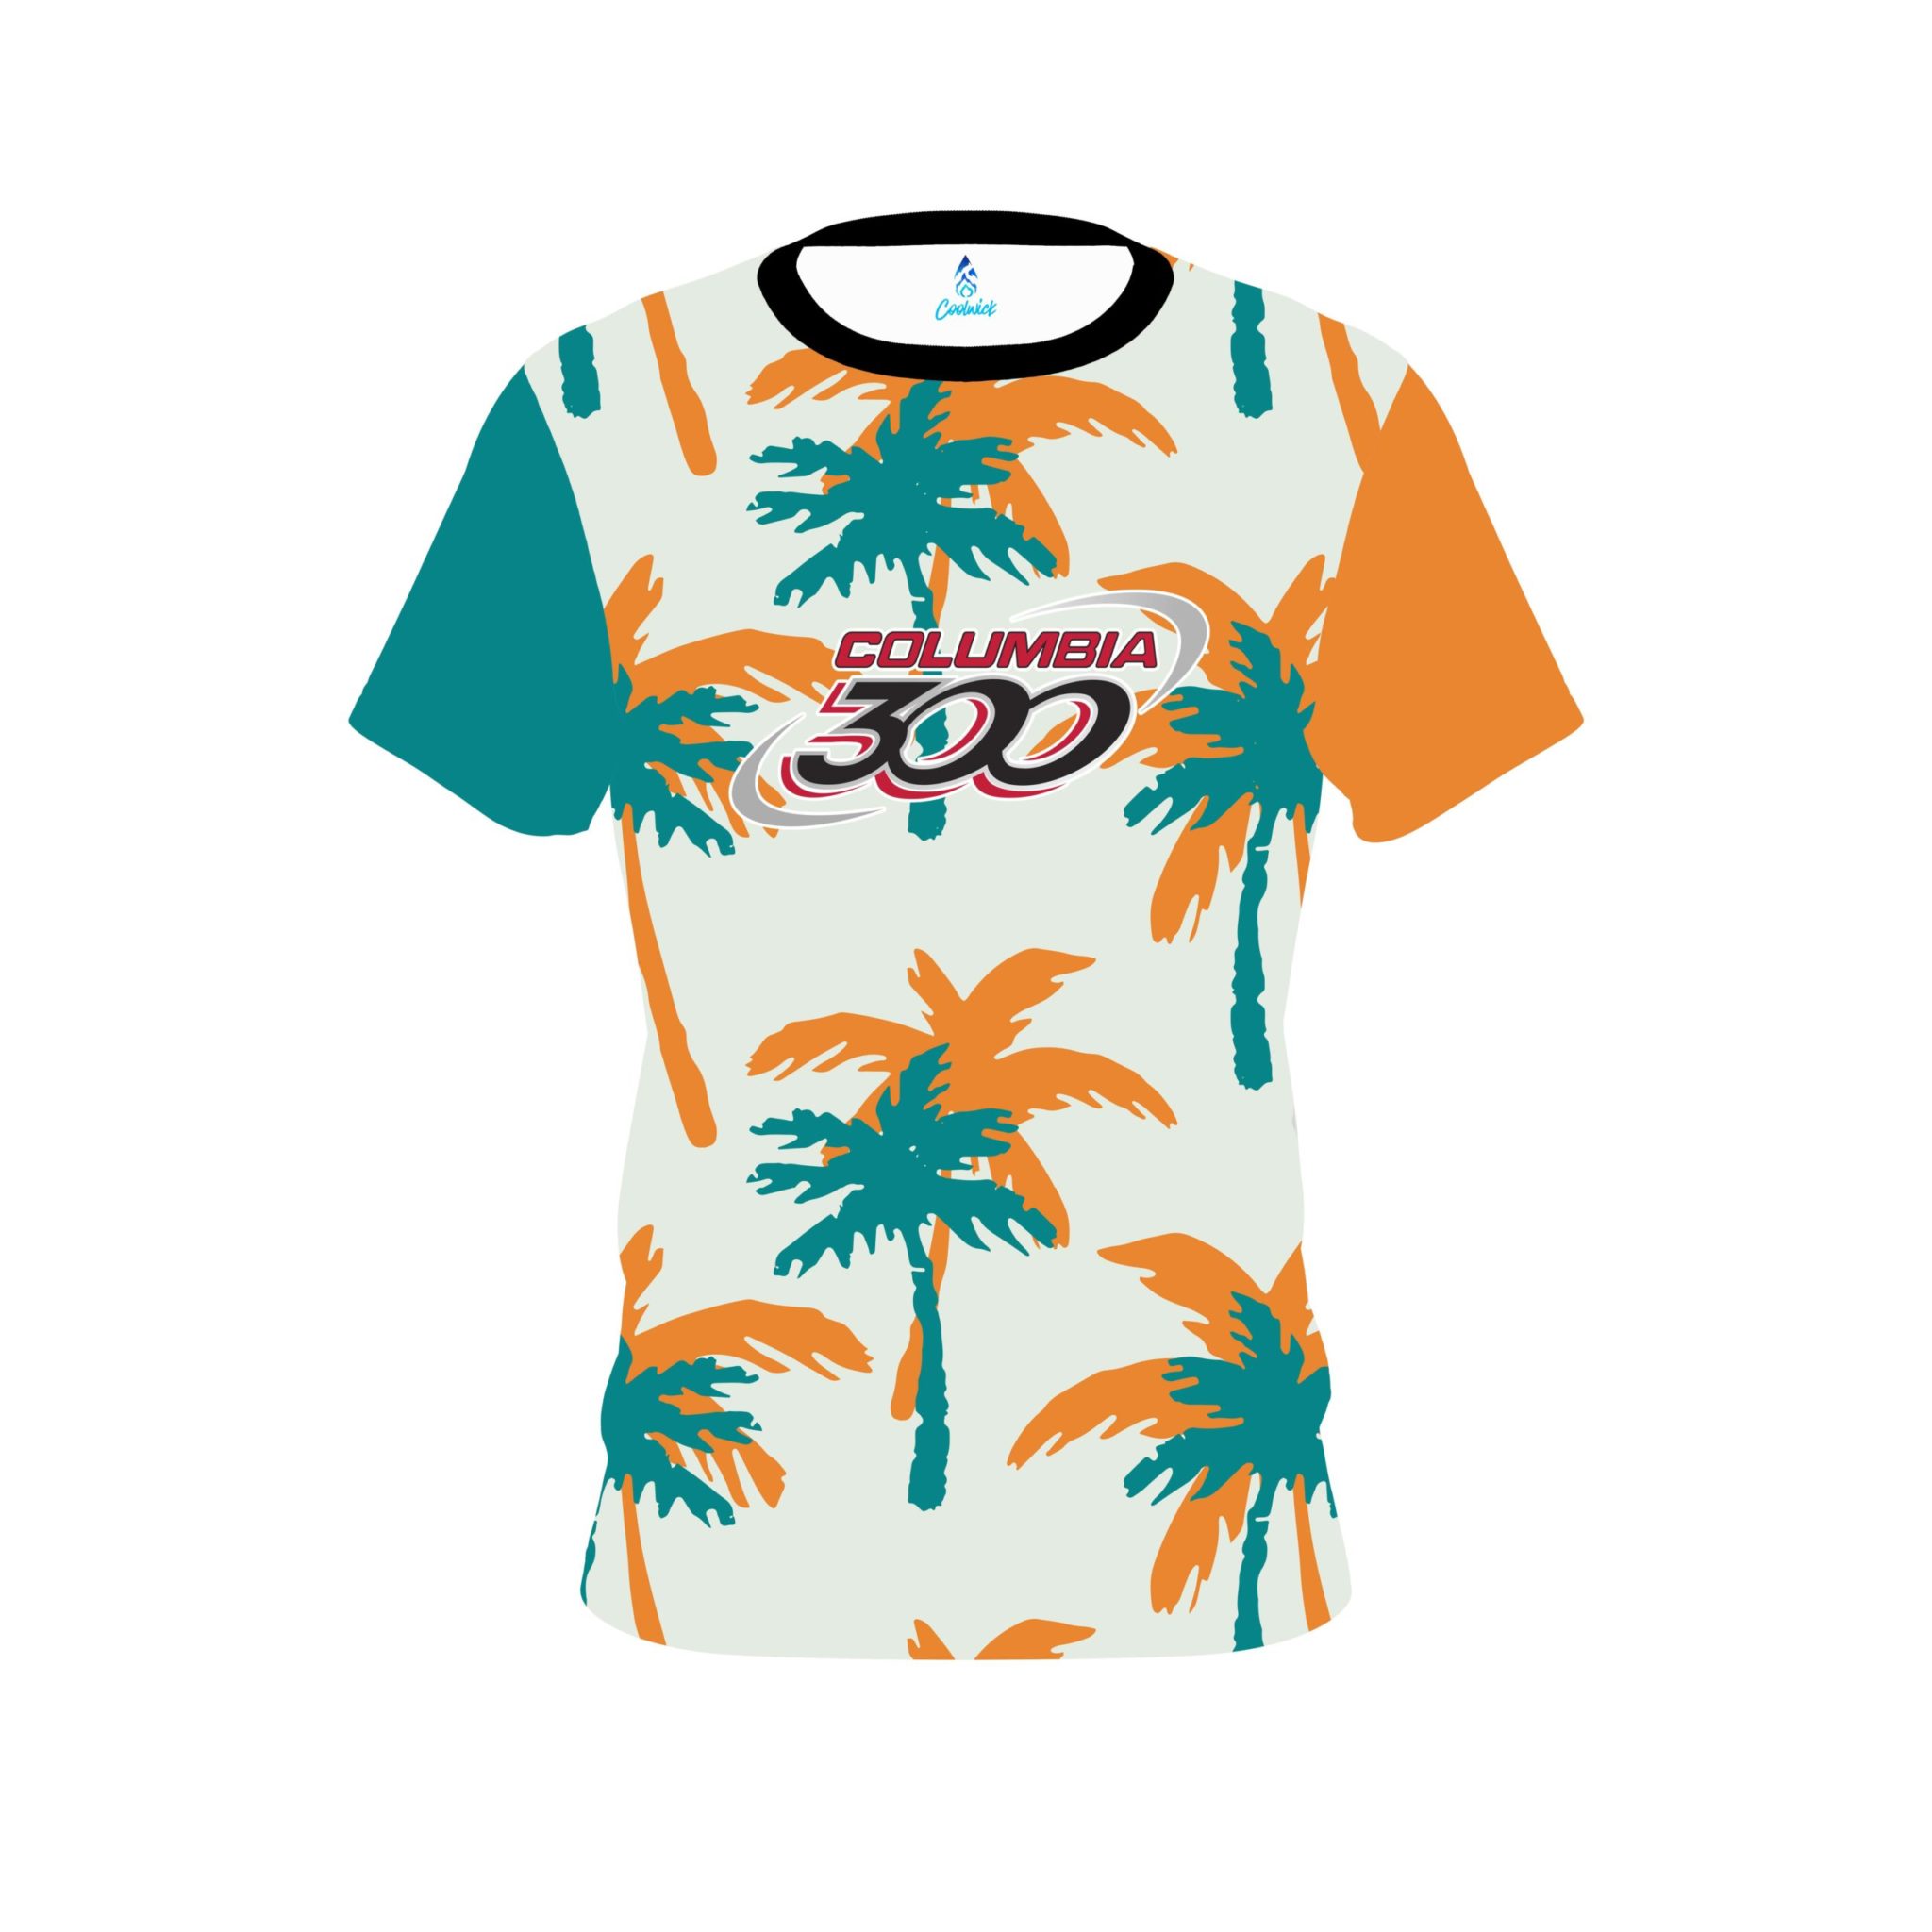 Columbia 300 Teal Orange Palm Trees CoolWick Bowling Jersey